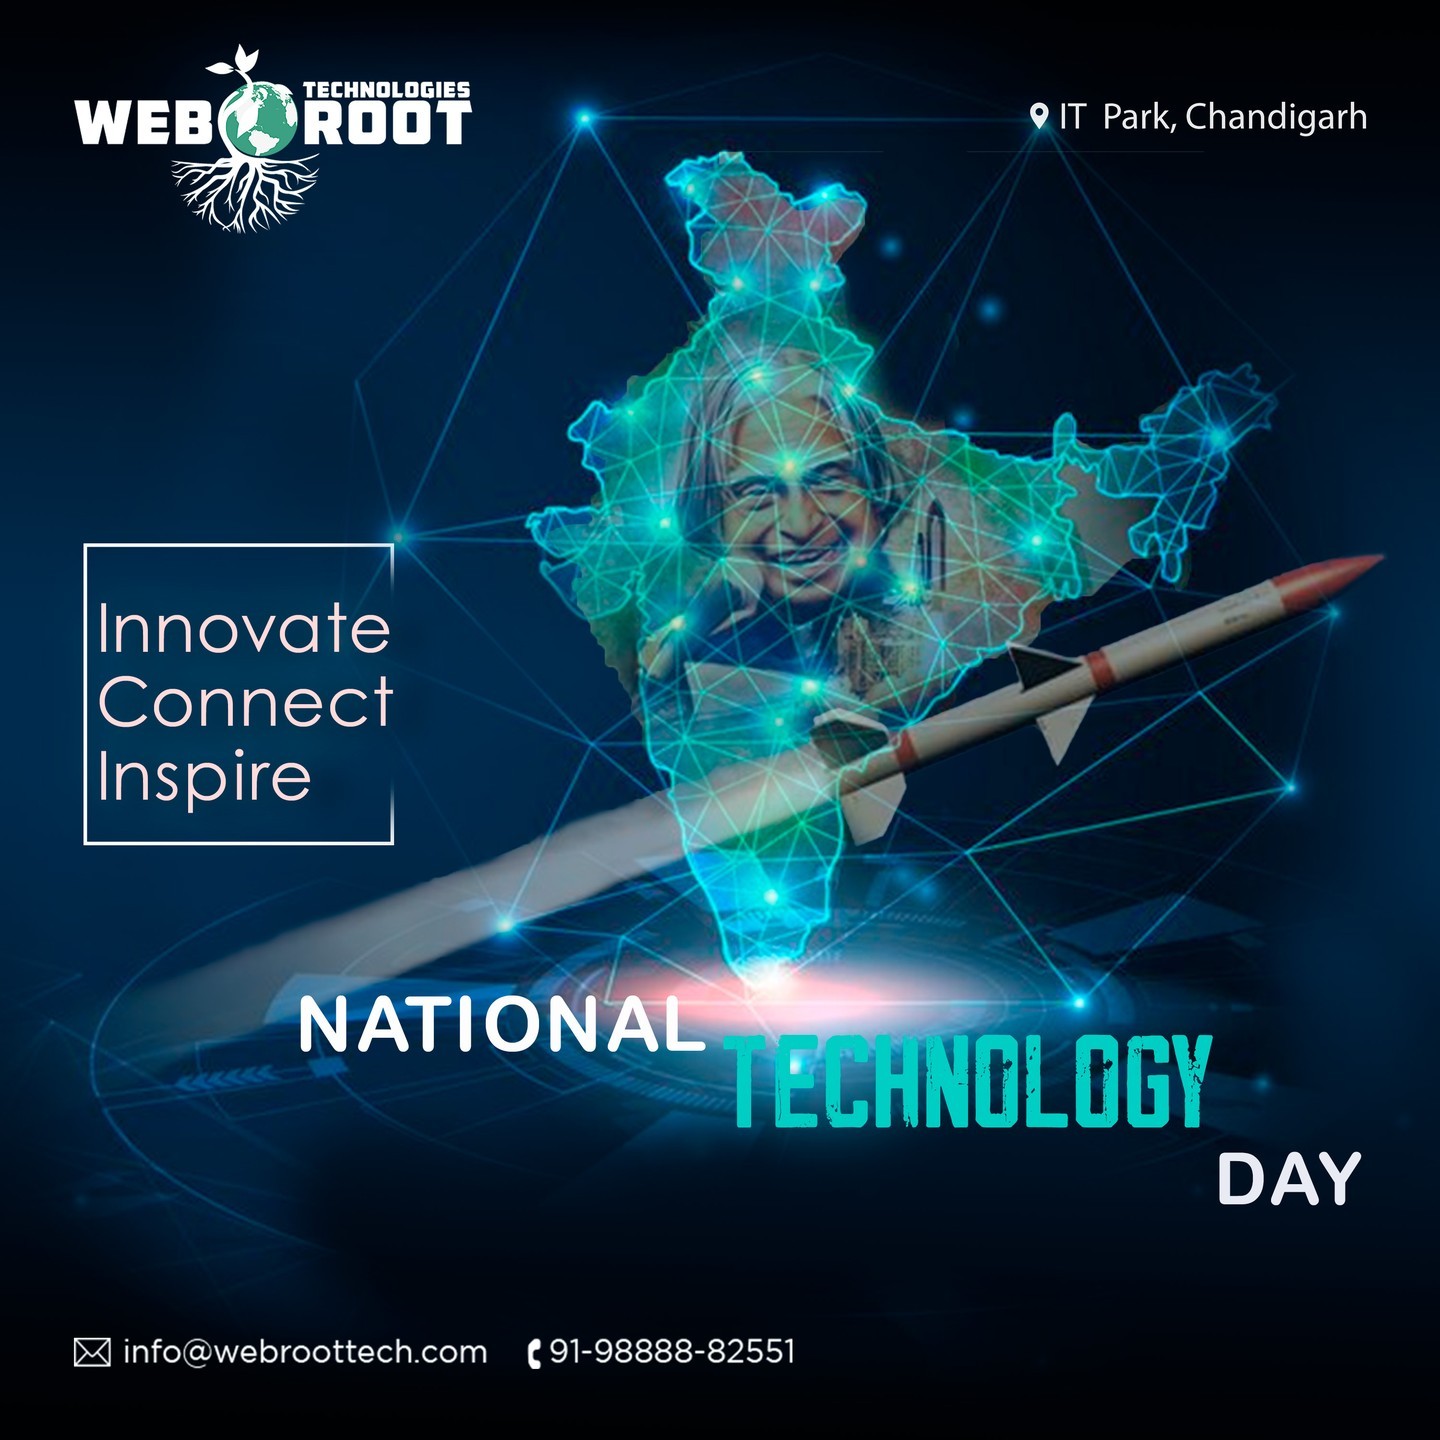 "The science of today is the technology of tomorrow."

Let us celebrate National Technology Day by honoring the scientists, engineers, and researchers who have contributed to India's growth through technical innovations.

Follow Us for More Updates!⠀⠀
Contact Us:⠀⠀⠀⠀
Call: 9888882551⠀⠀⠀⠀
E-Mail: info@webroottech.com⠀⠀⠀⠀
Website: https://buff.ly/2YRuJ7P

#nationaltechnologyday #technology #india #technologyday #national #tech #nationaltechiesday #science  #may #knowledge #technologynews #indiantechnology #indian #pokhran #apjabdulkalam #webroottech #webdesigning #webdevelopment